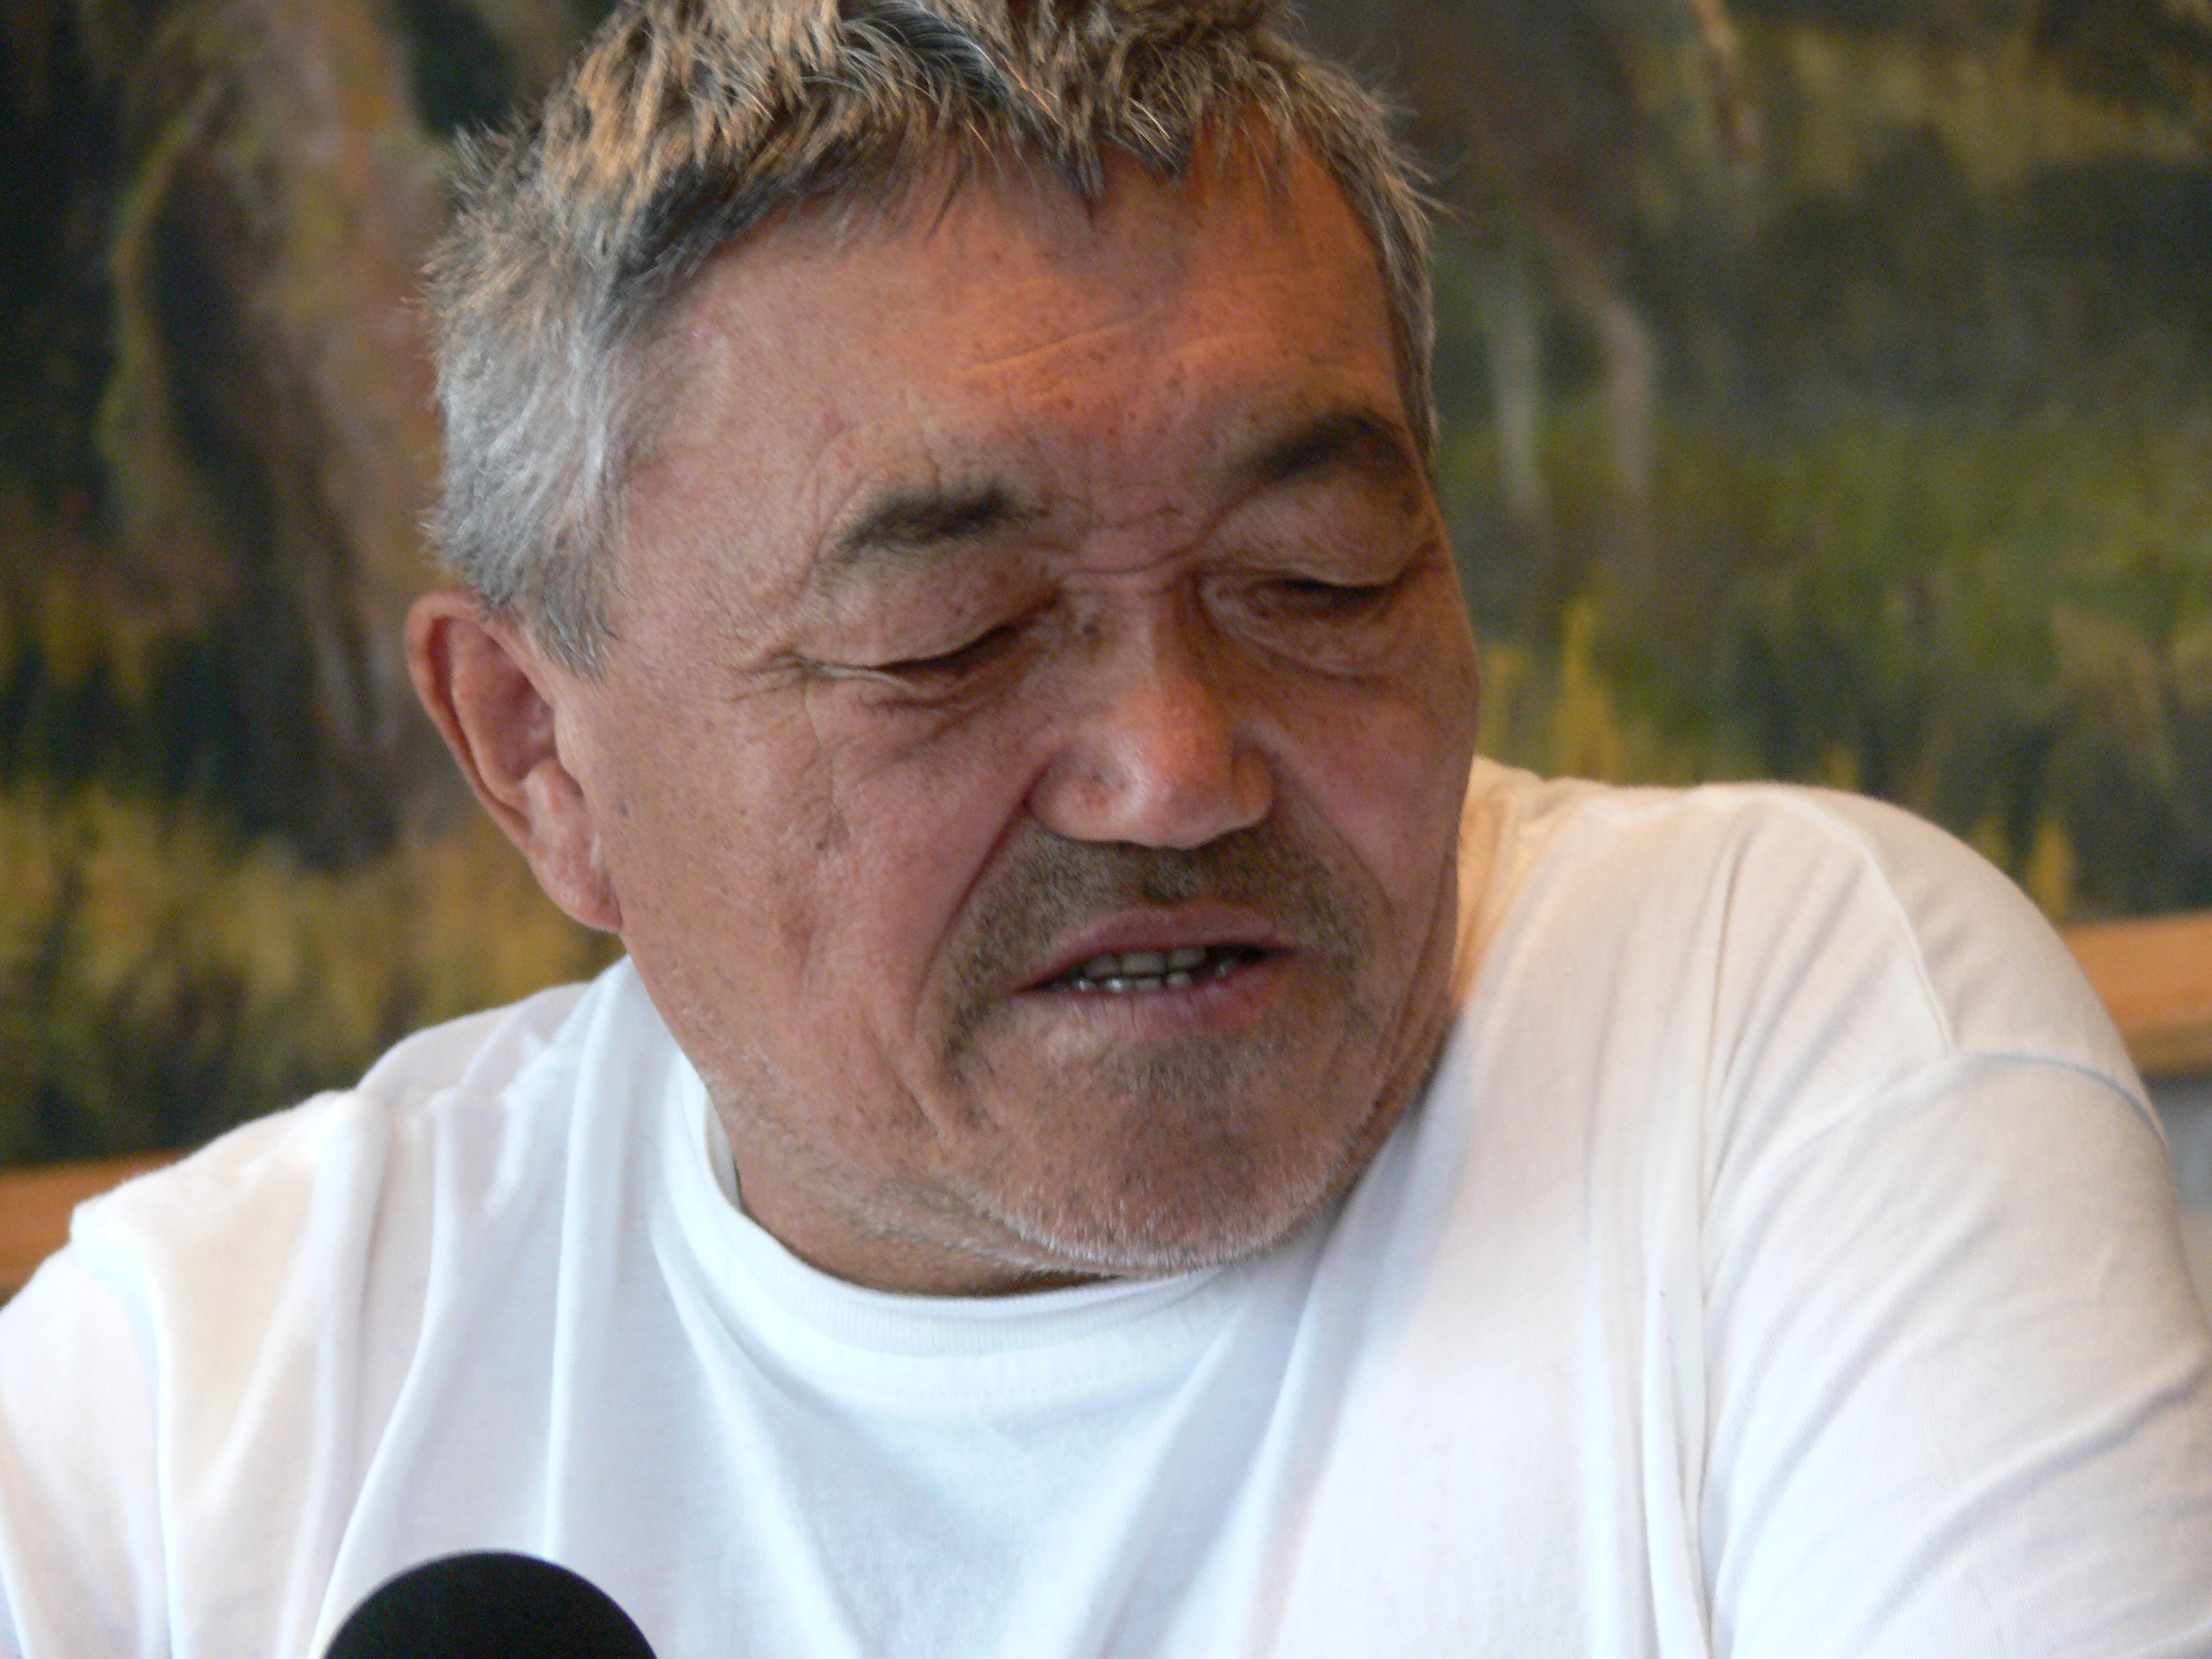 Close up of a man wearing a white t-shirt speaking into a microphone.